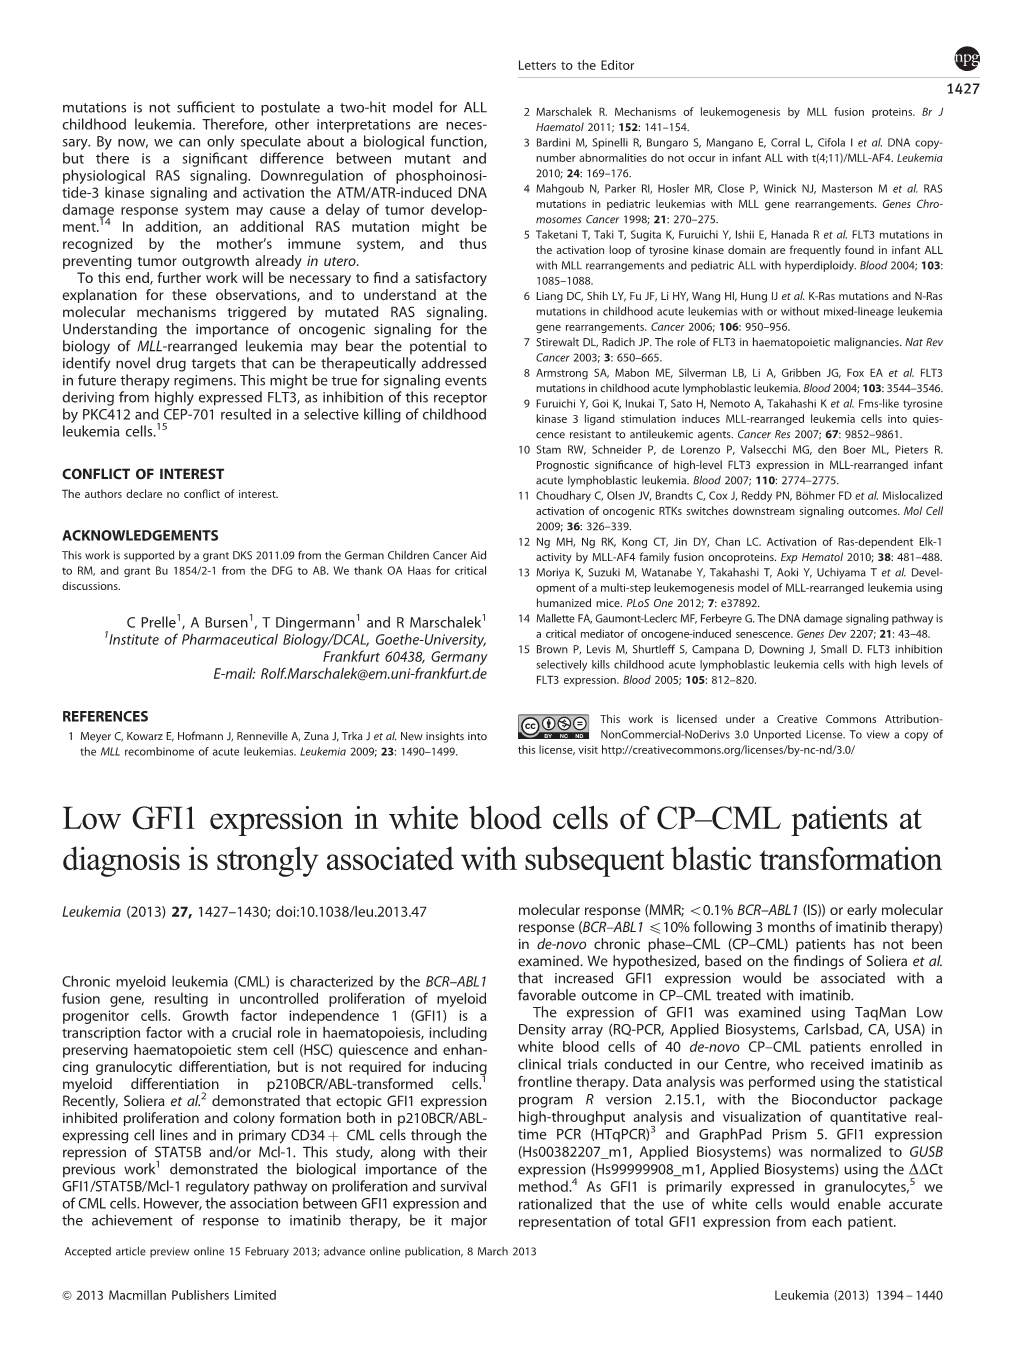 Low GFI1 Expression in White Blood Cells of CP&Ndash;CML